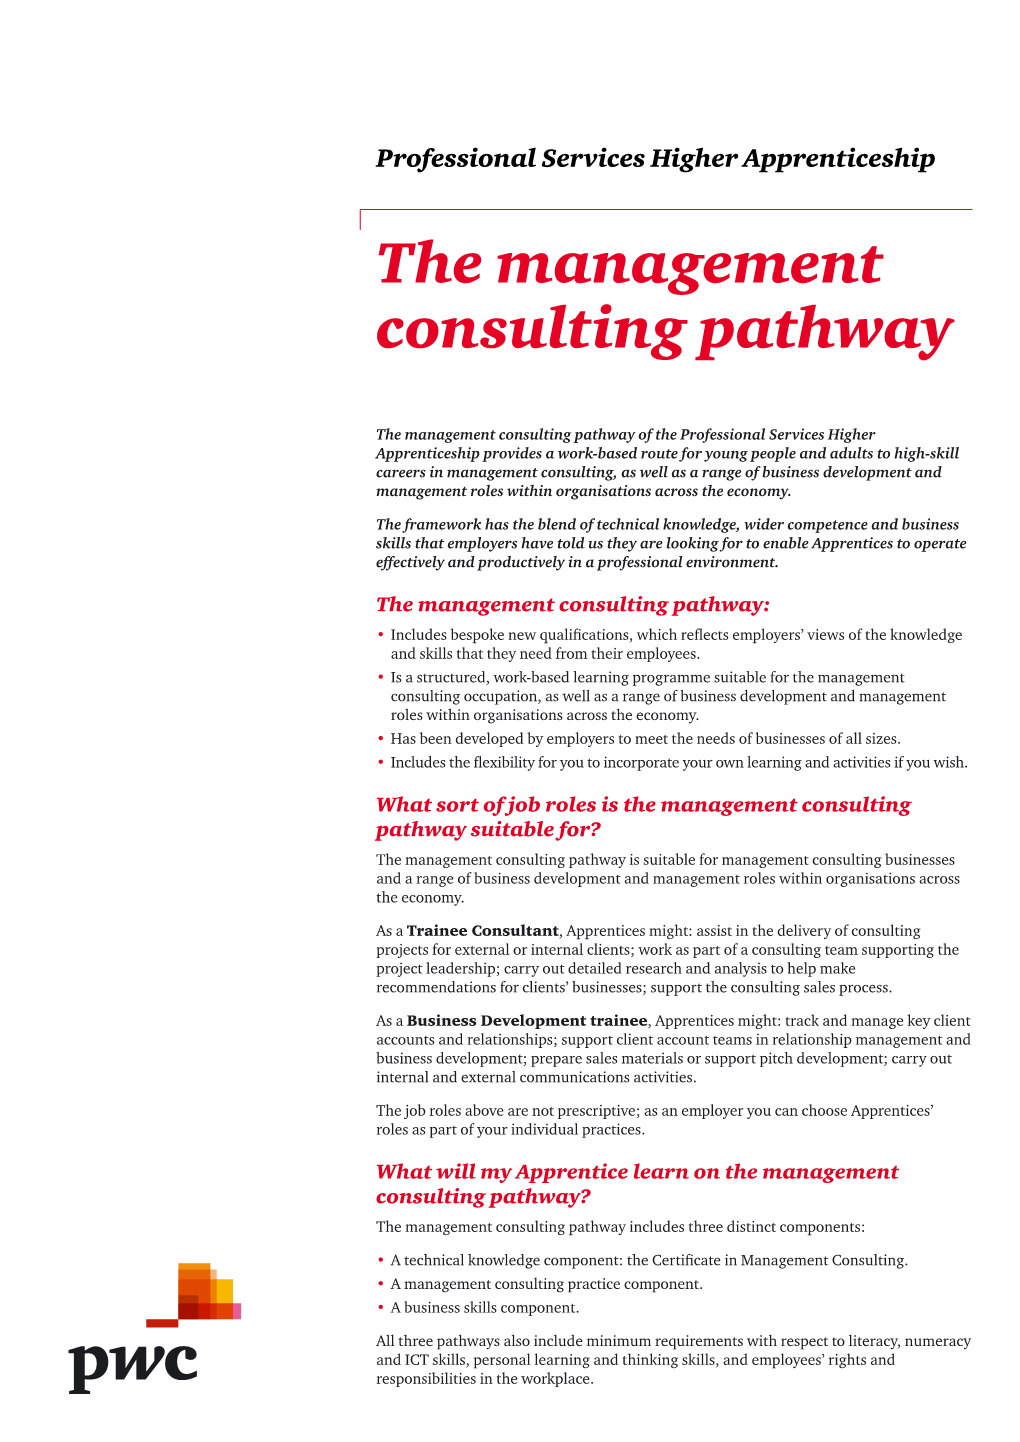 The Management Consulting Pathway